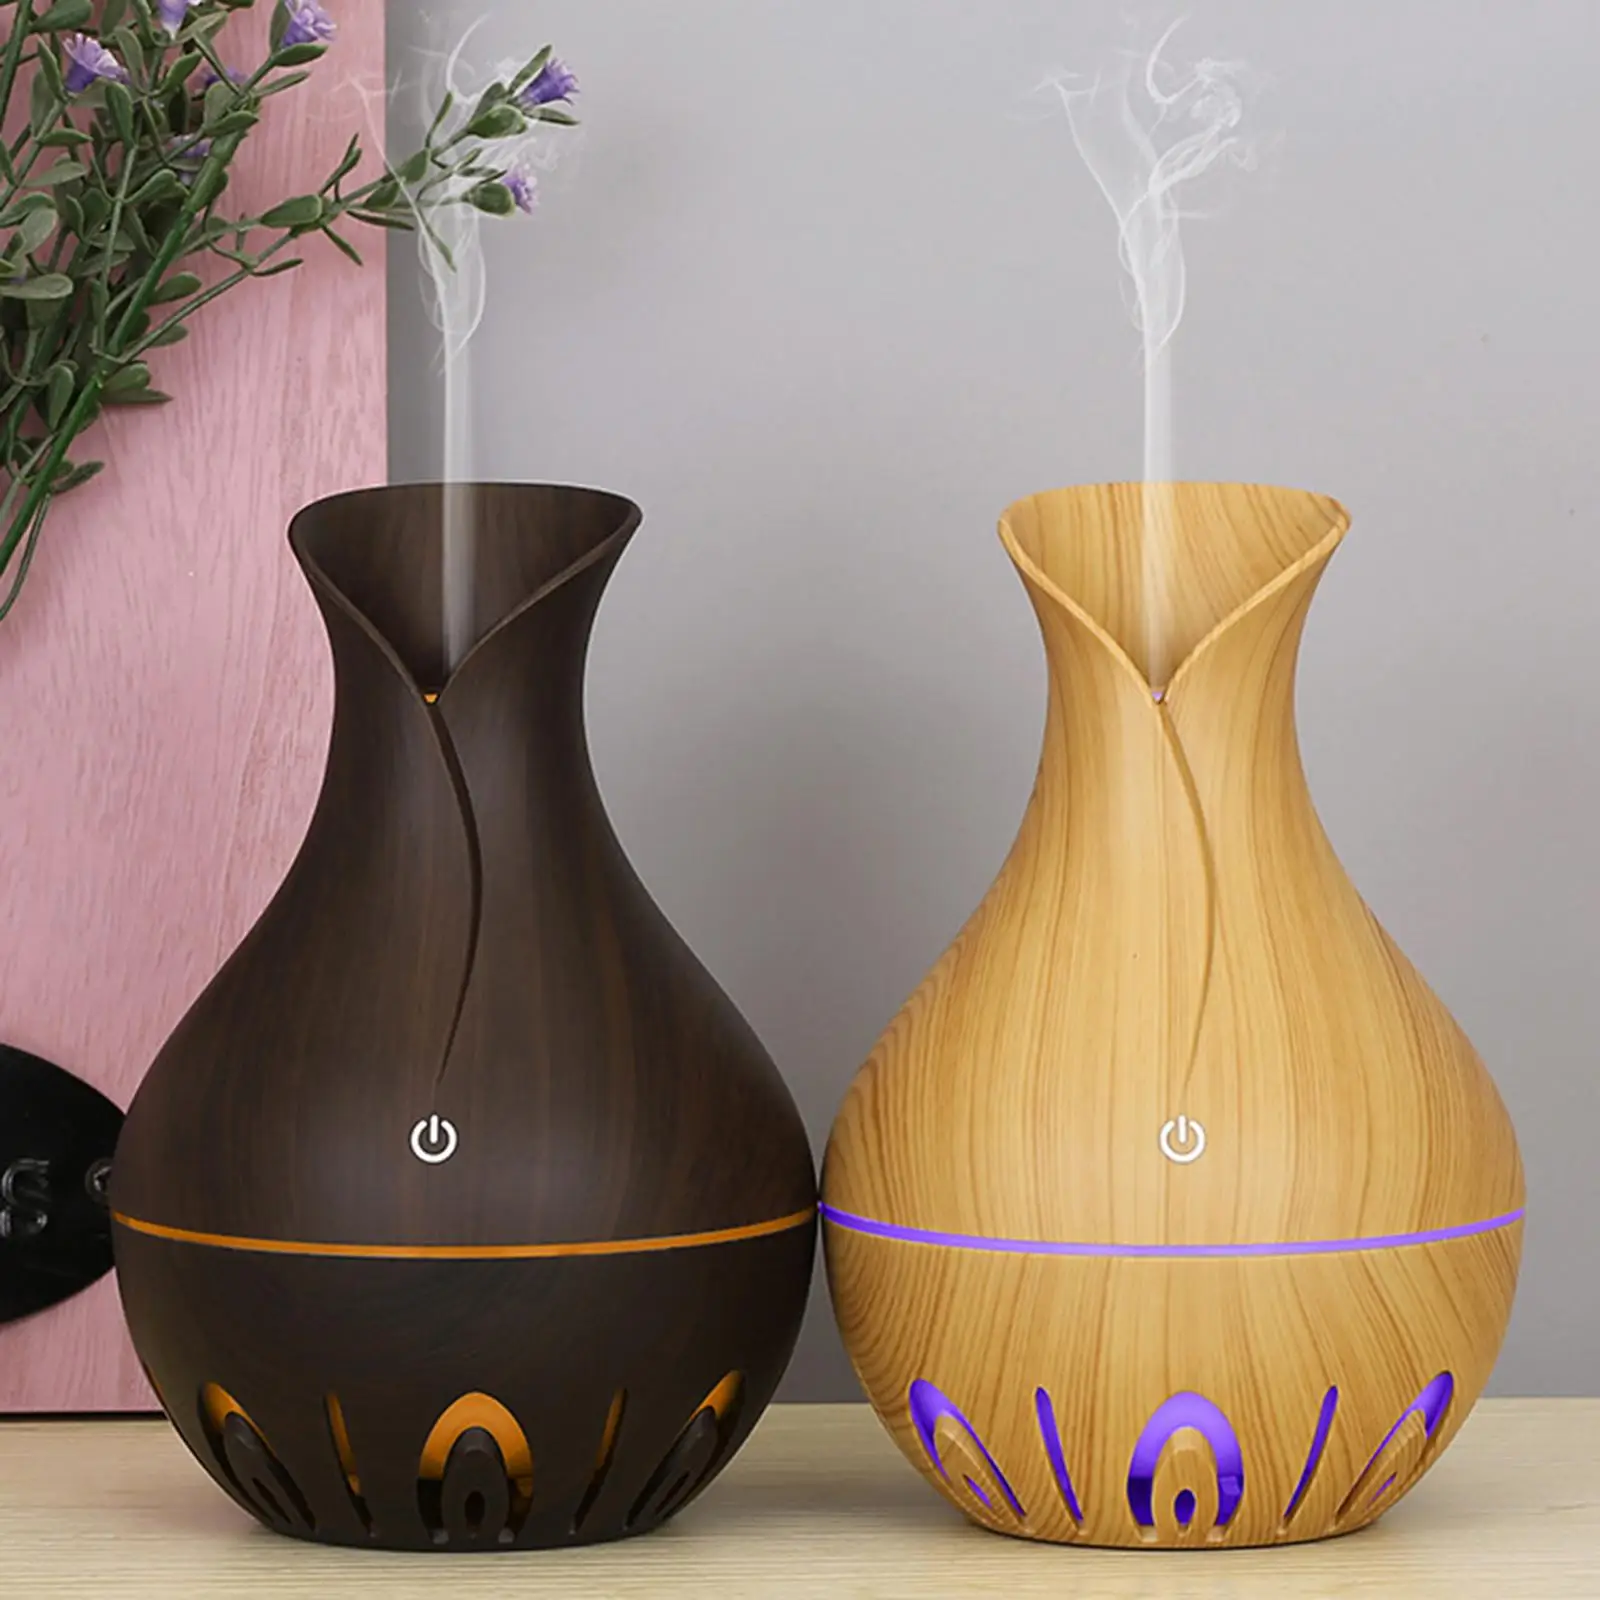 Essential Oil Diffuser Ultrasonic LED Super Quiet Humidifier for Gifts Table Travel